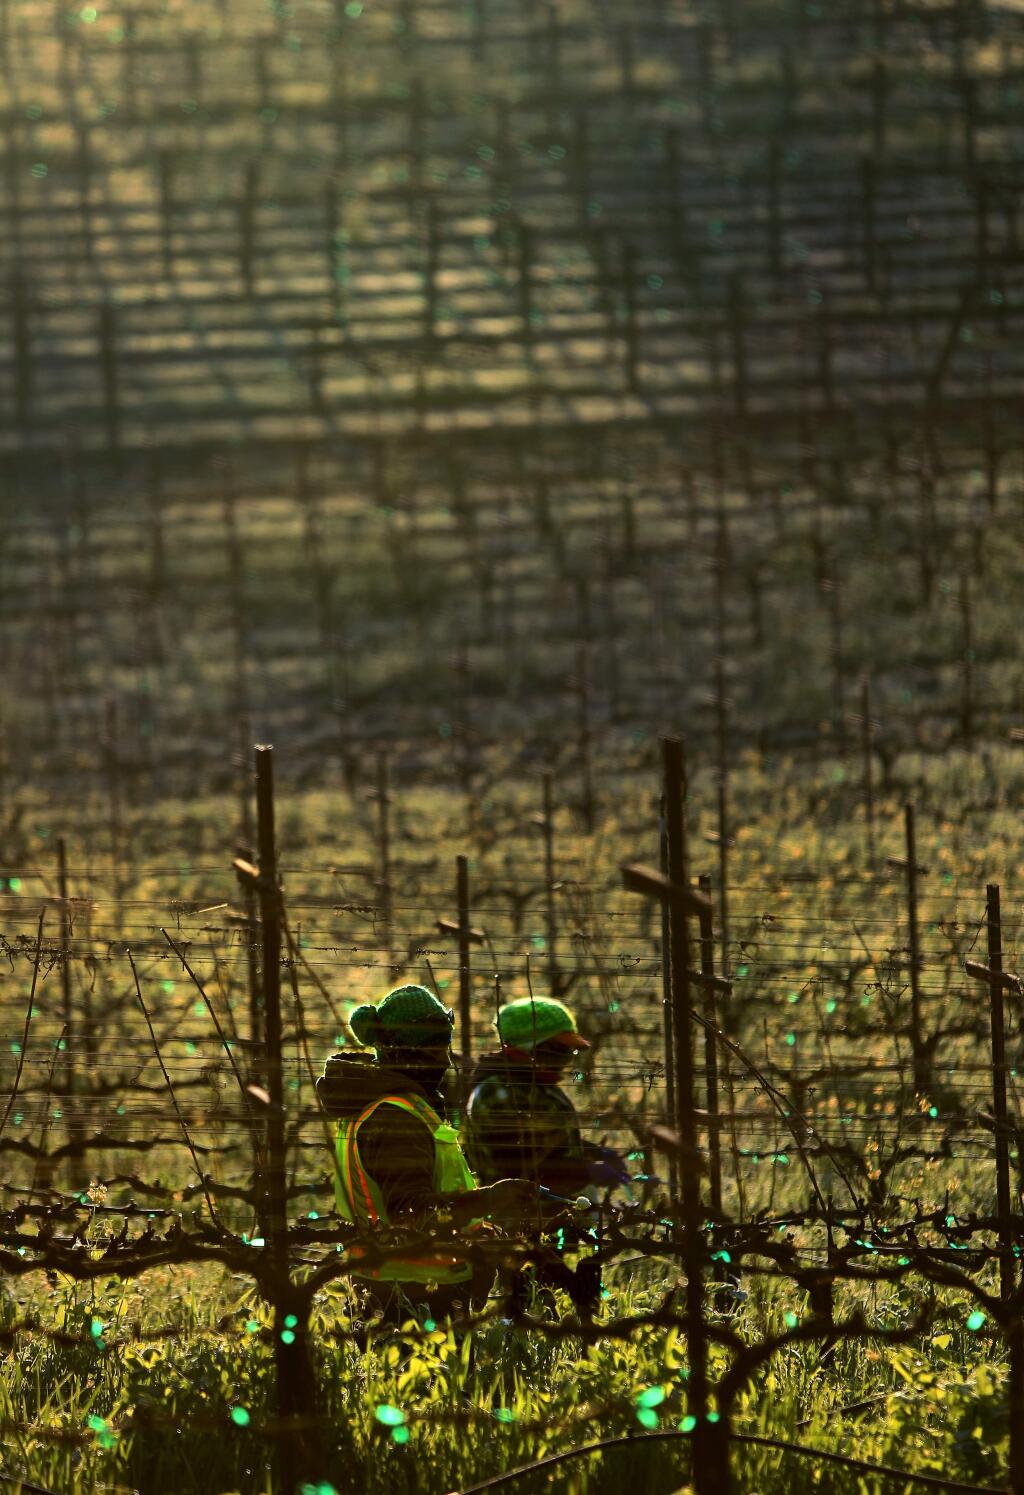 Vineyard workers from Redwood Empire Vineyard Management inc. work in a vineyard along Westside Road in Healdsburg, Tuesday Feb. 20, 2018 bundled up against the cold morning air. (Kent Porter / The Press Democrat) 2018